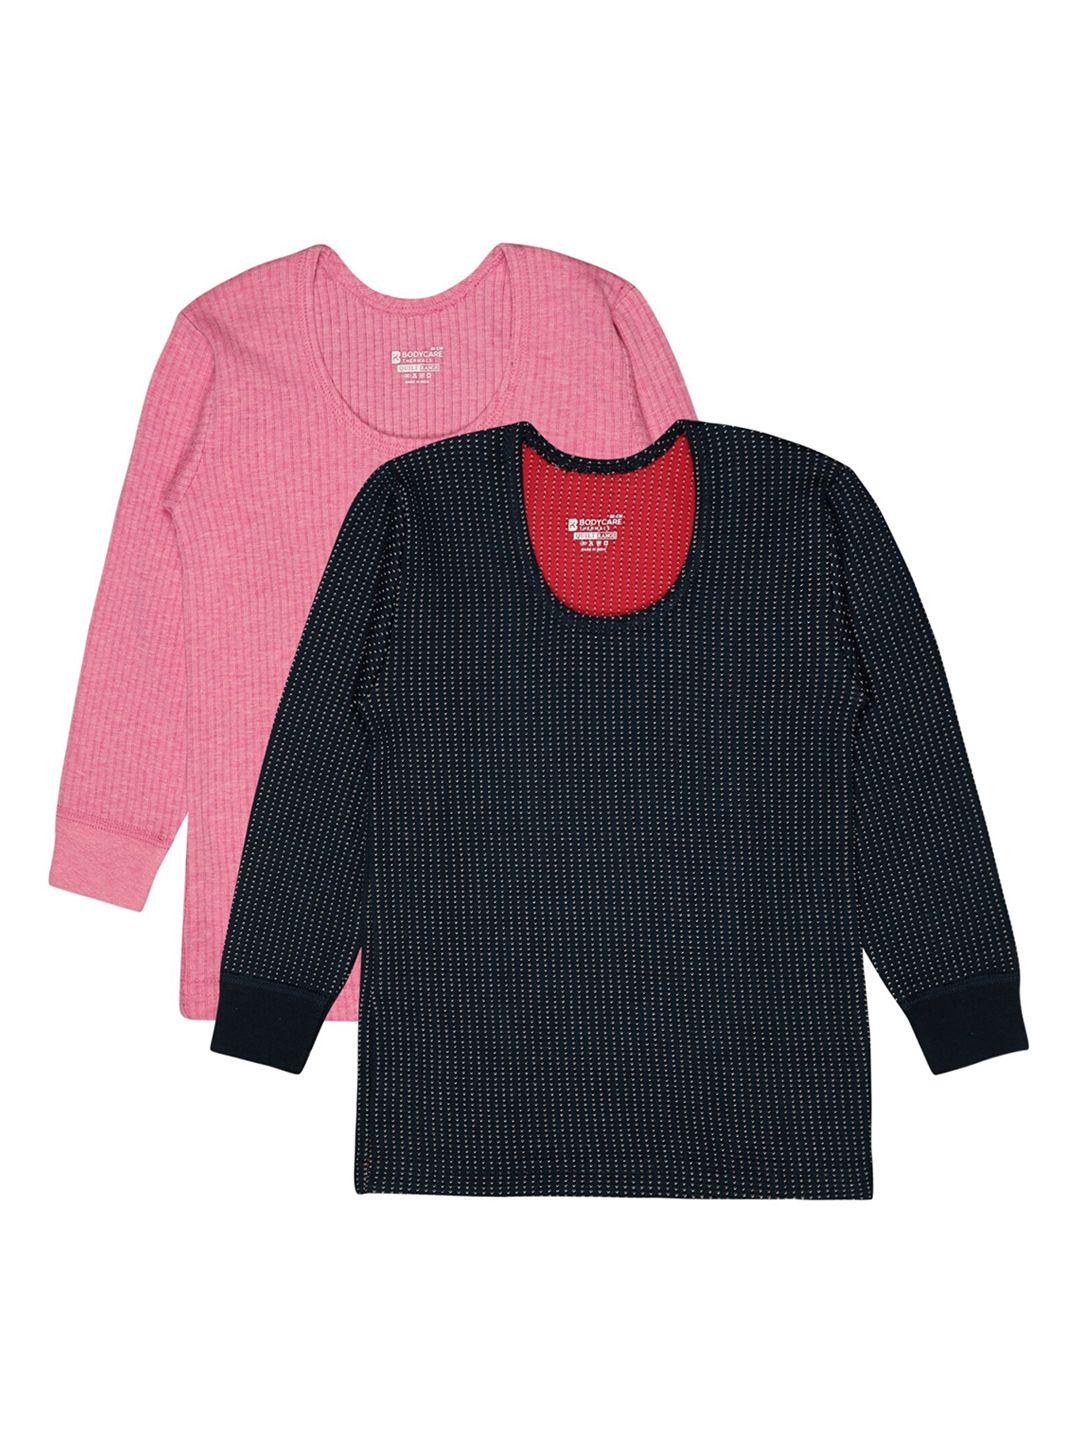 bodycare insider kids pack of 2 round neck thermal tops